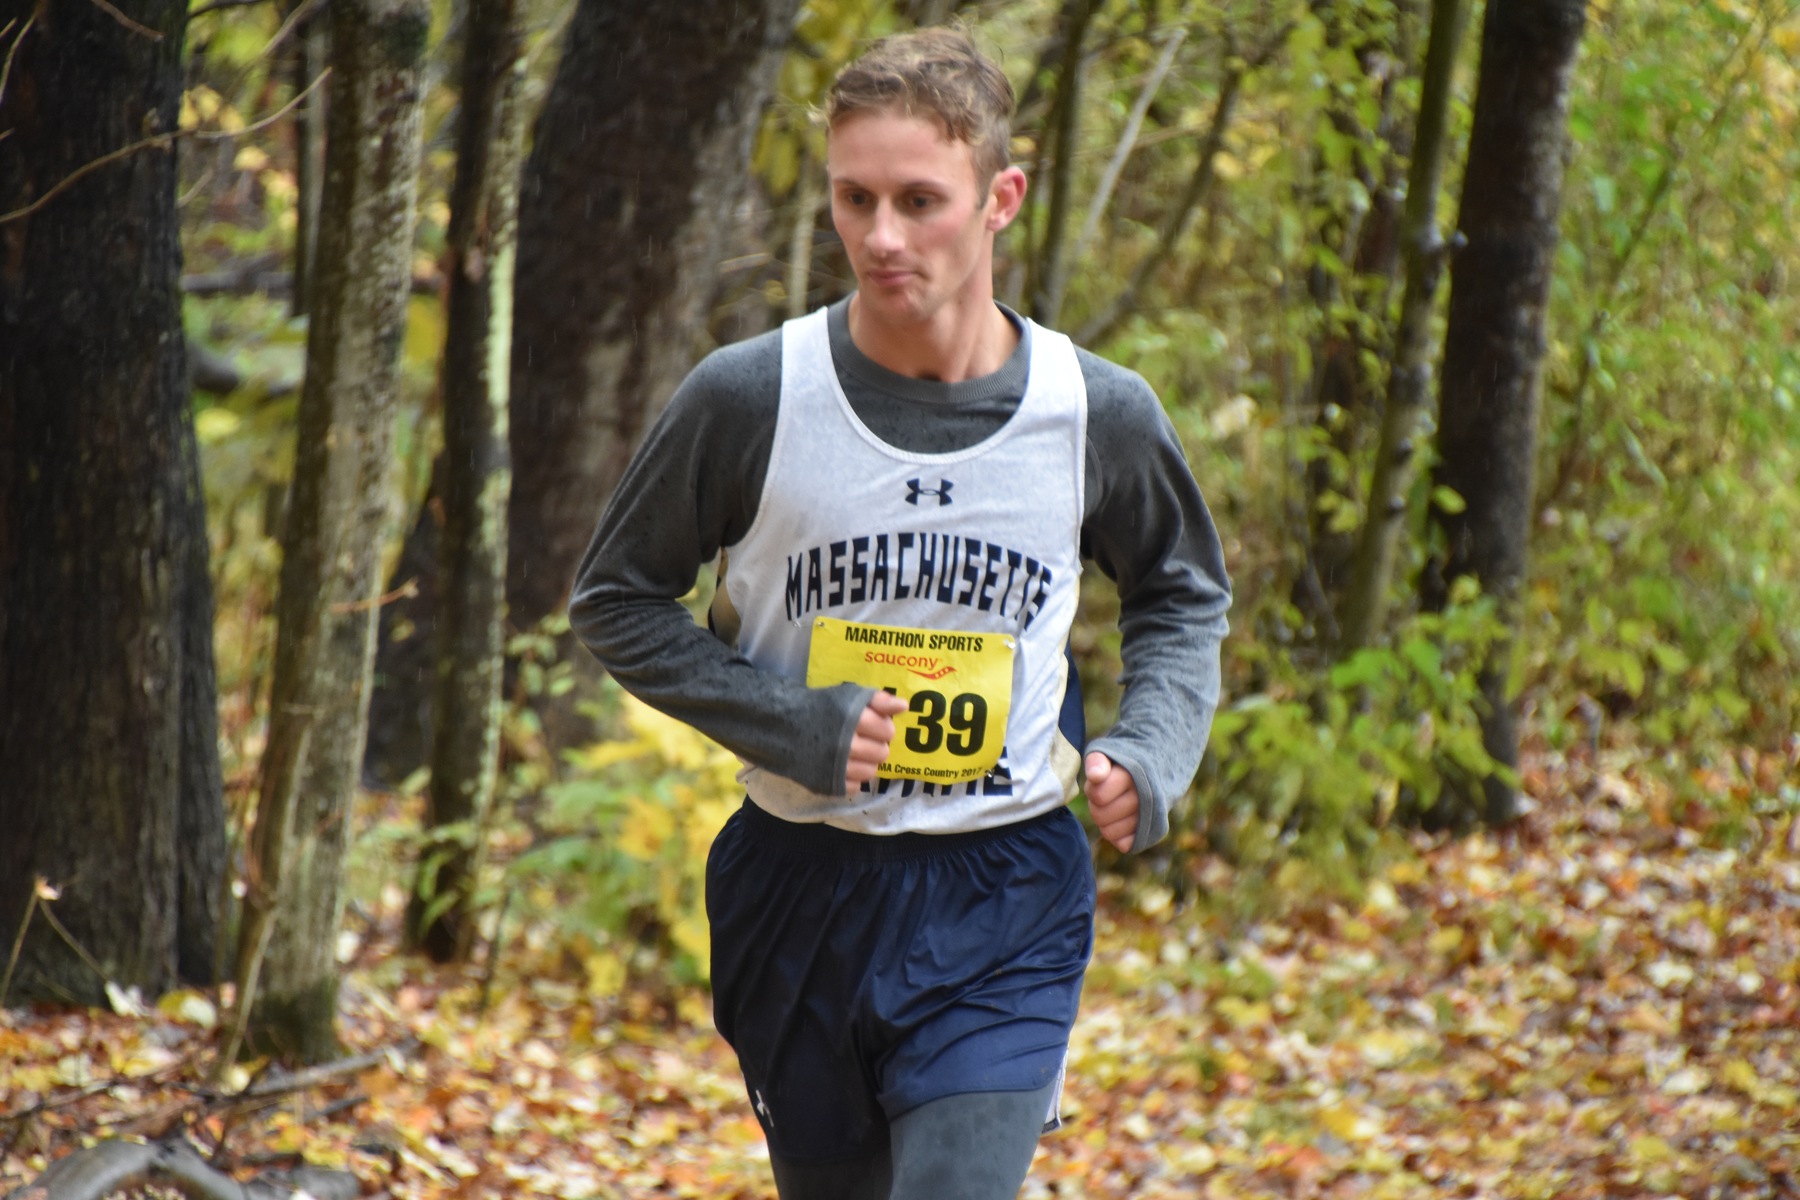 Men’s Cross Country Finishes Sixth at MASCAC Championships